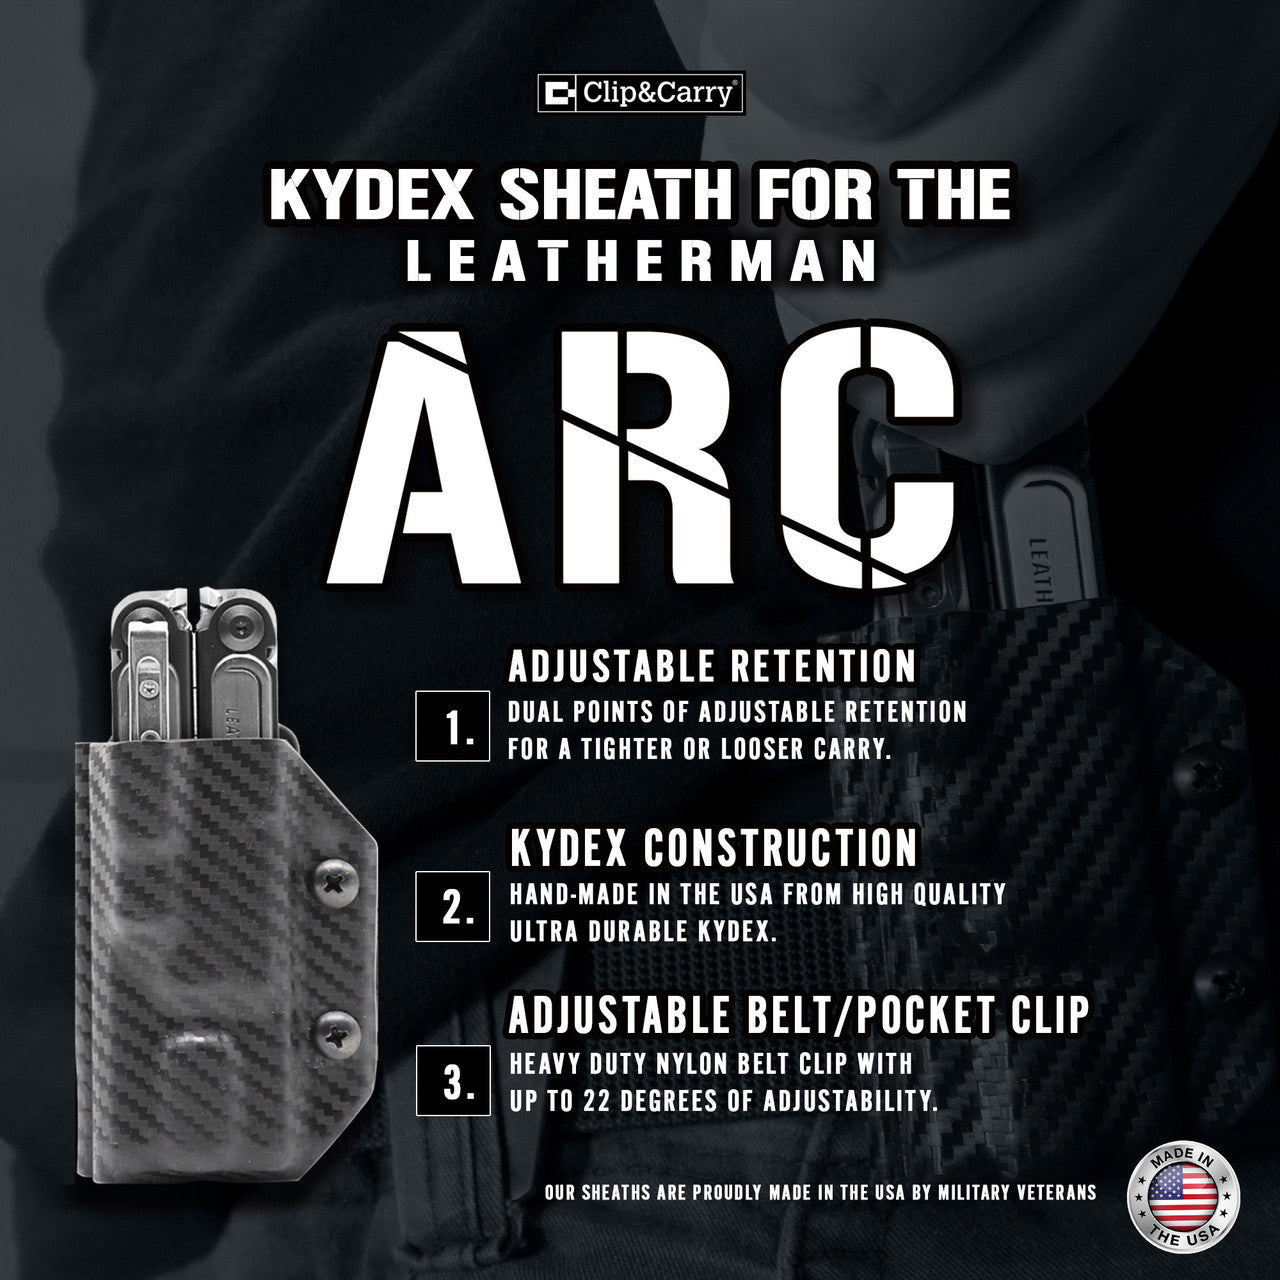 Kydex Sheath for the Leatherman Arc Clip & Carry